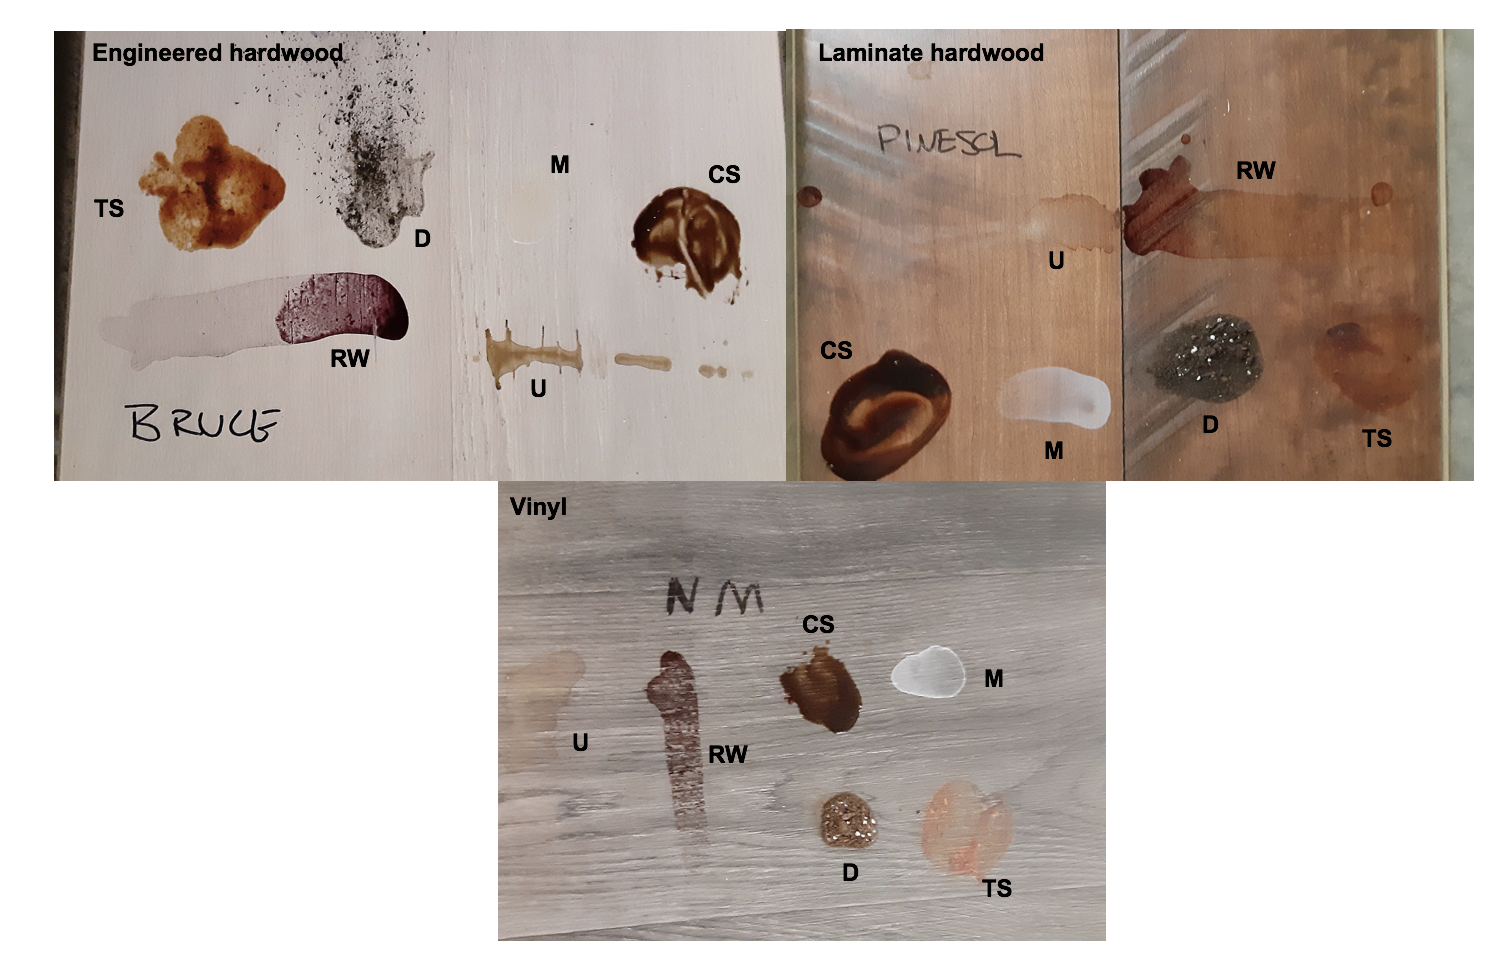 Samples of the three floor types and six stain types used in our hardwood floor cleaner testing.